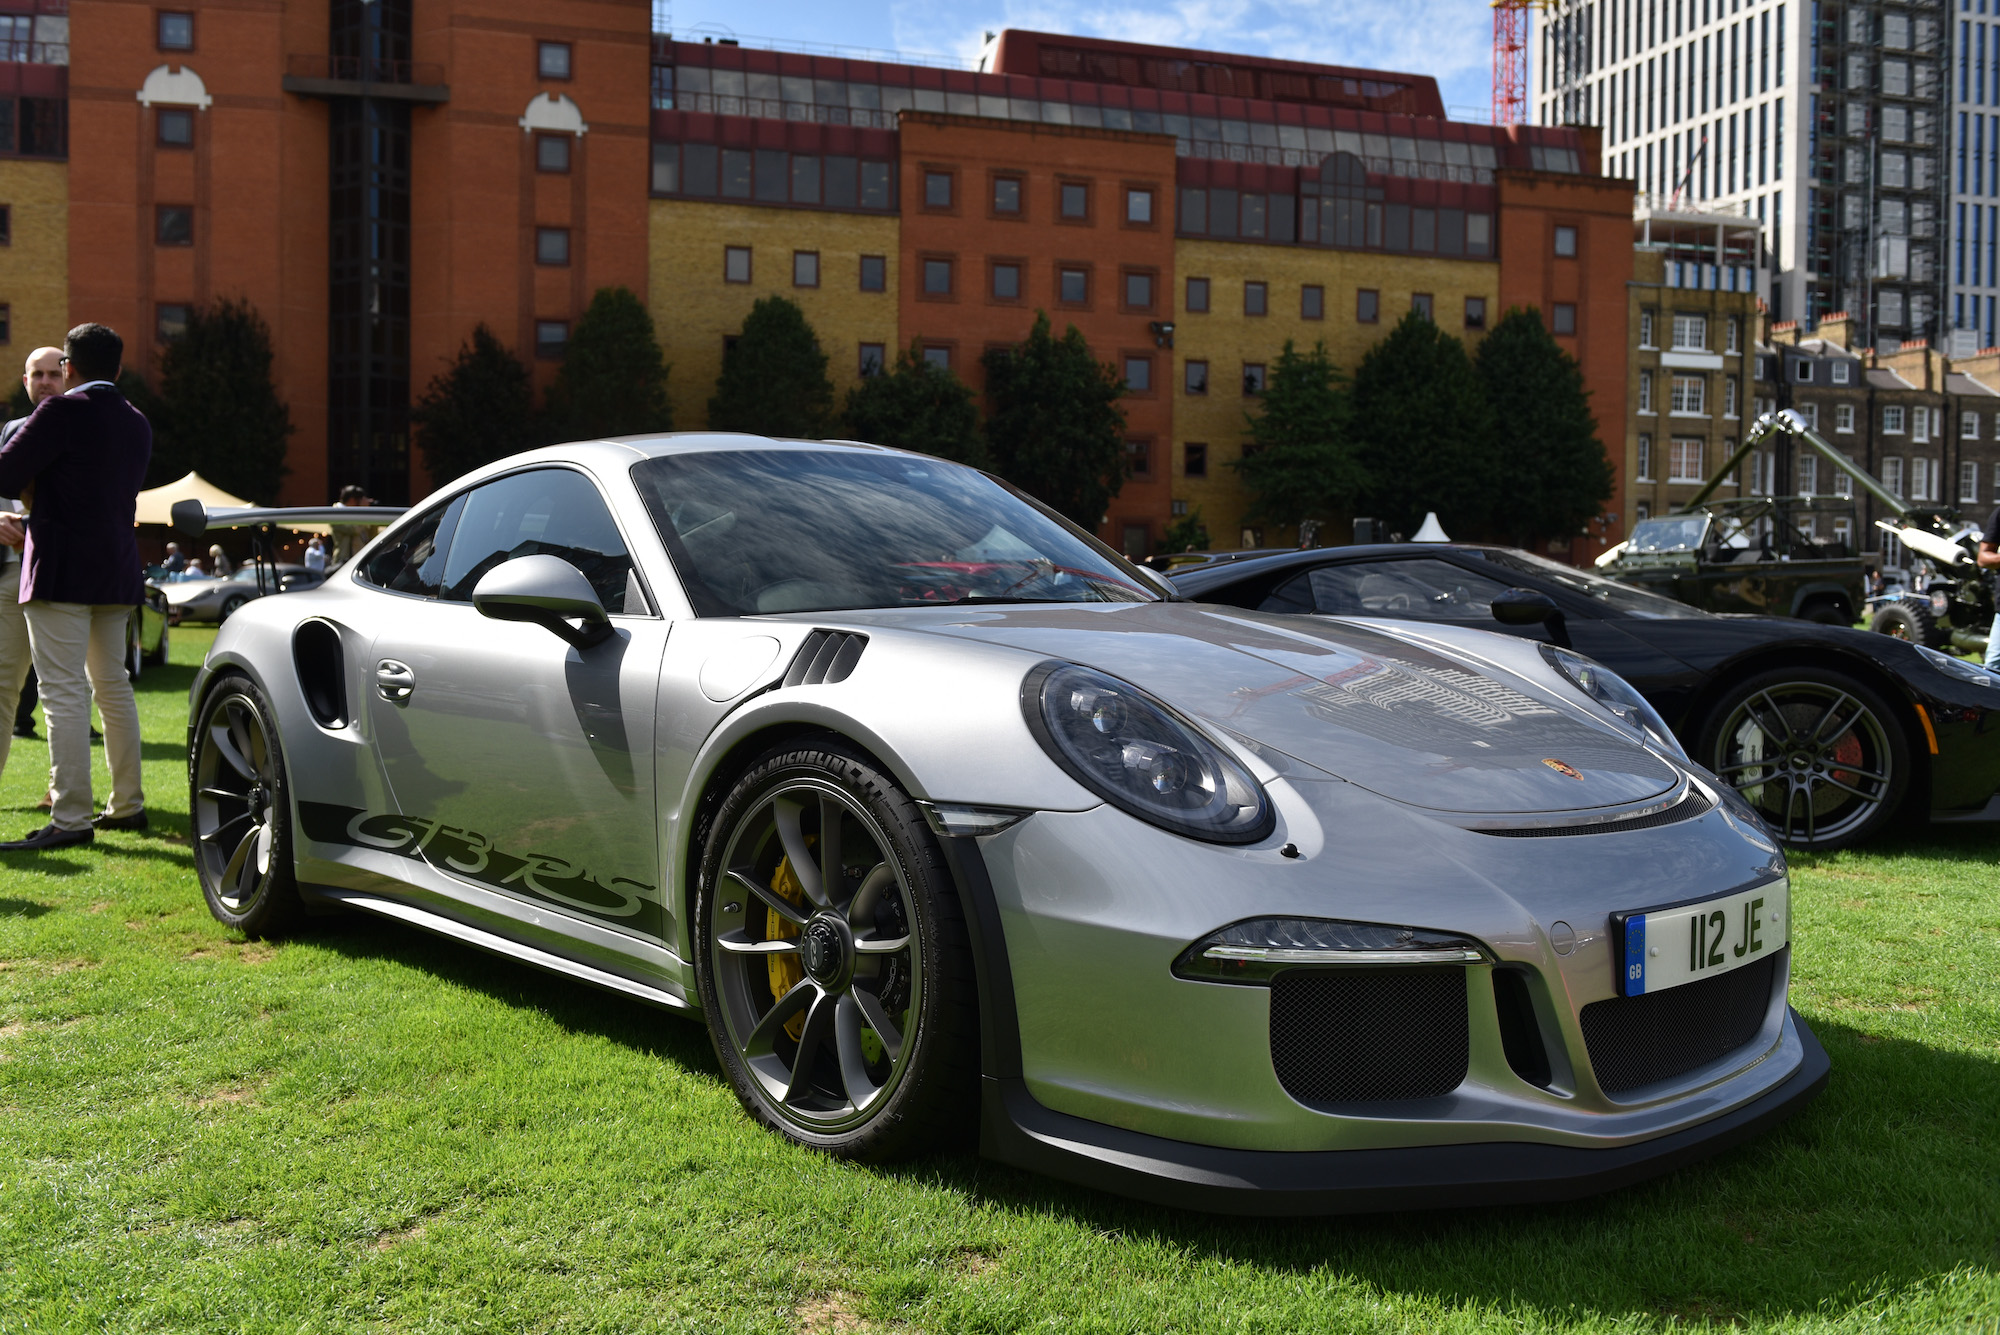 A silver 2016 Porsche 911 GT3 RS luxury sports car on display outside during the London Concours at Honourable Artillery Company on August 20, 2020, in London, England.